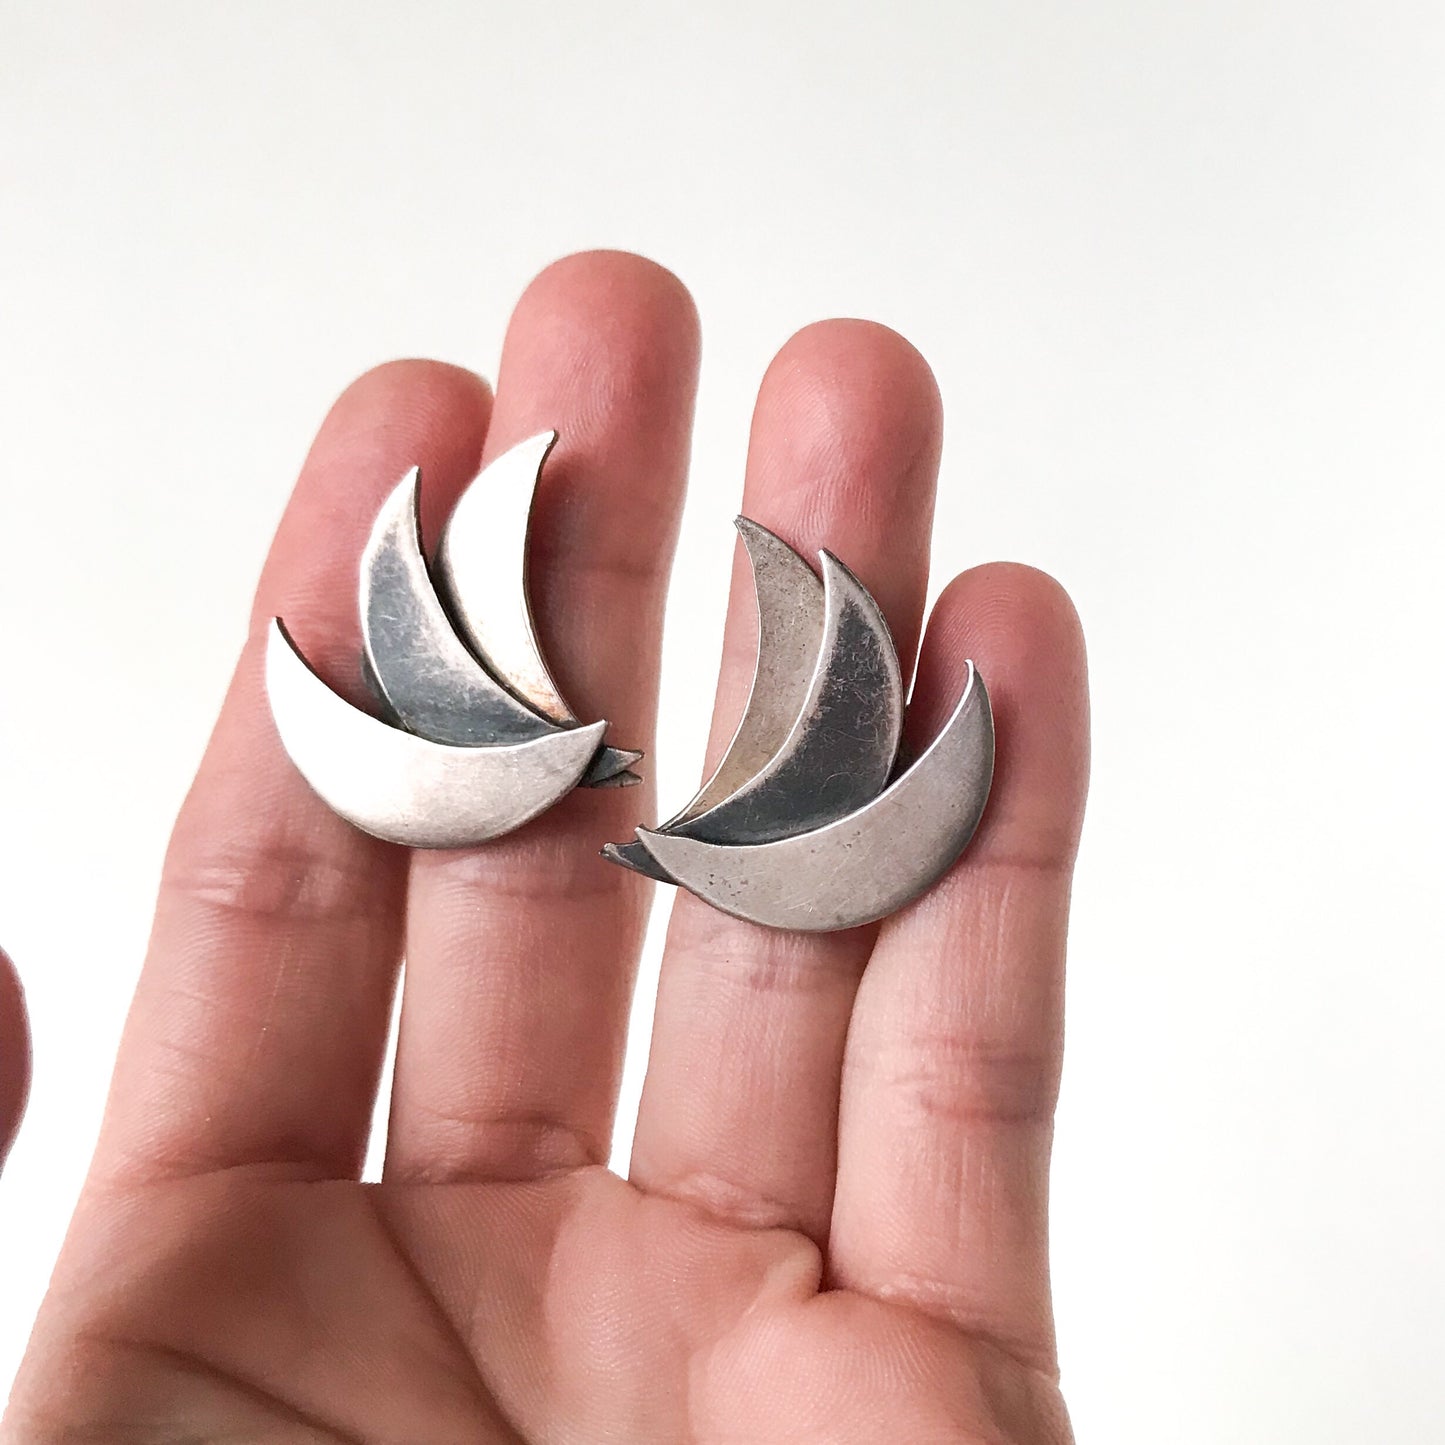 Mid-Century Modernist Crescent Earrings Sterling, Mexico c. 1950